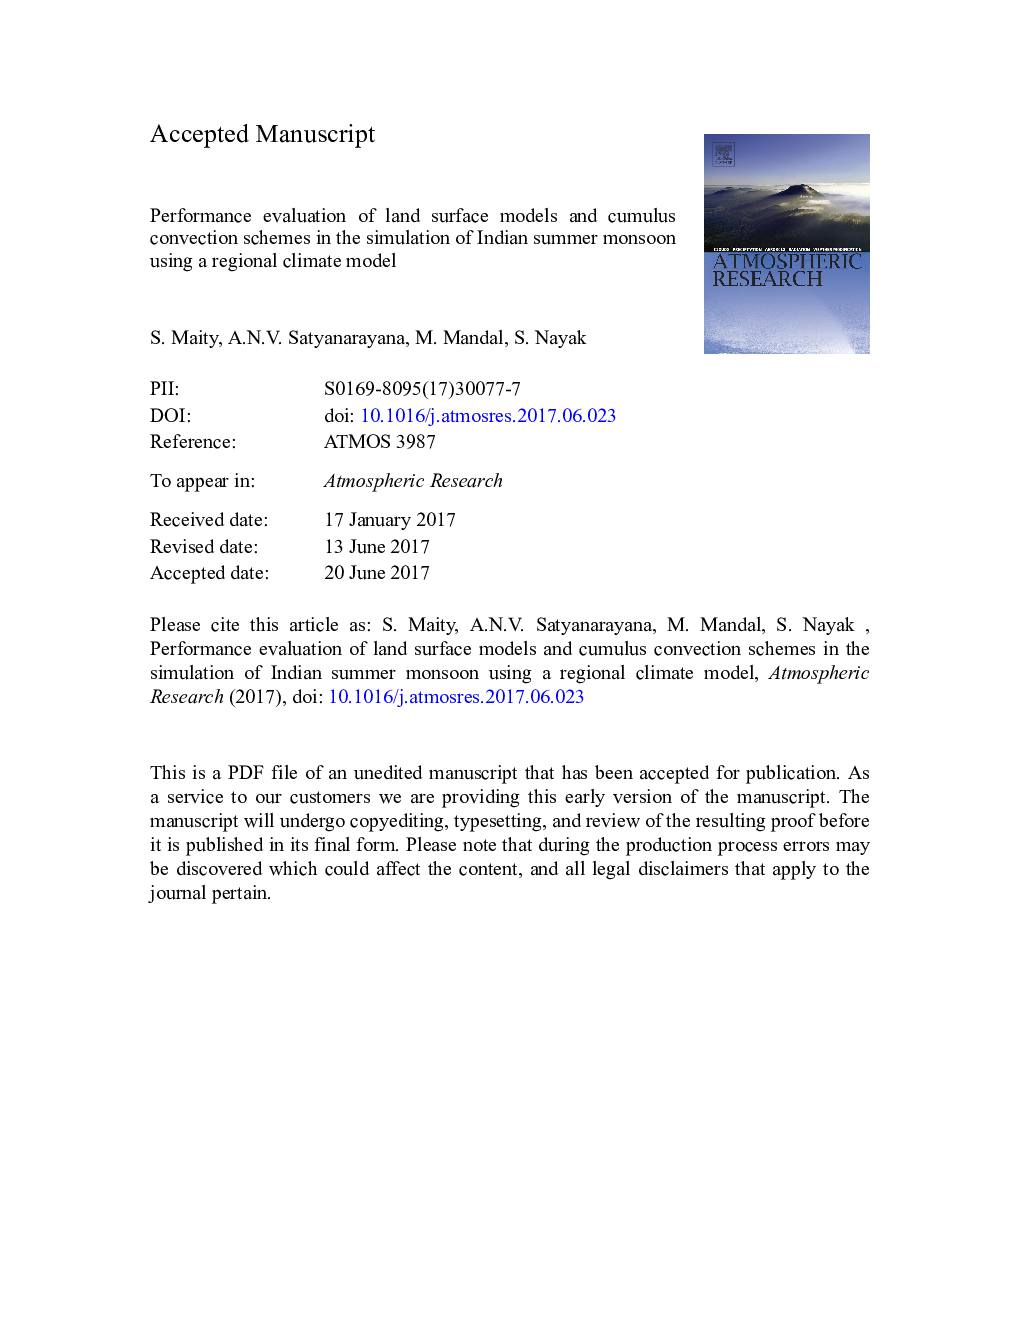 Performance evaluation of land surface models and cumulus convection schemes in the simulation of Indian summer monsoon using a regional climate model